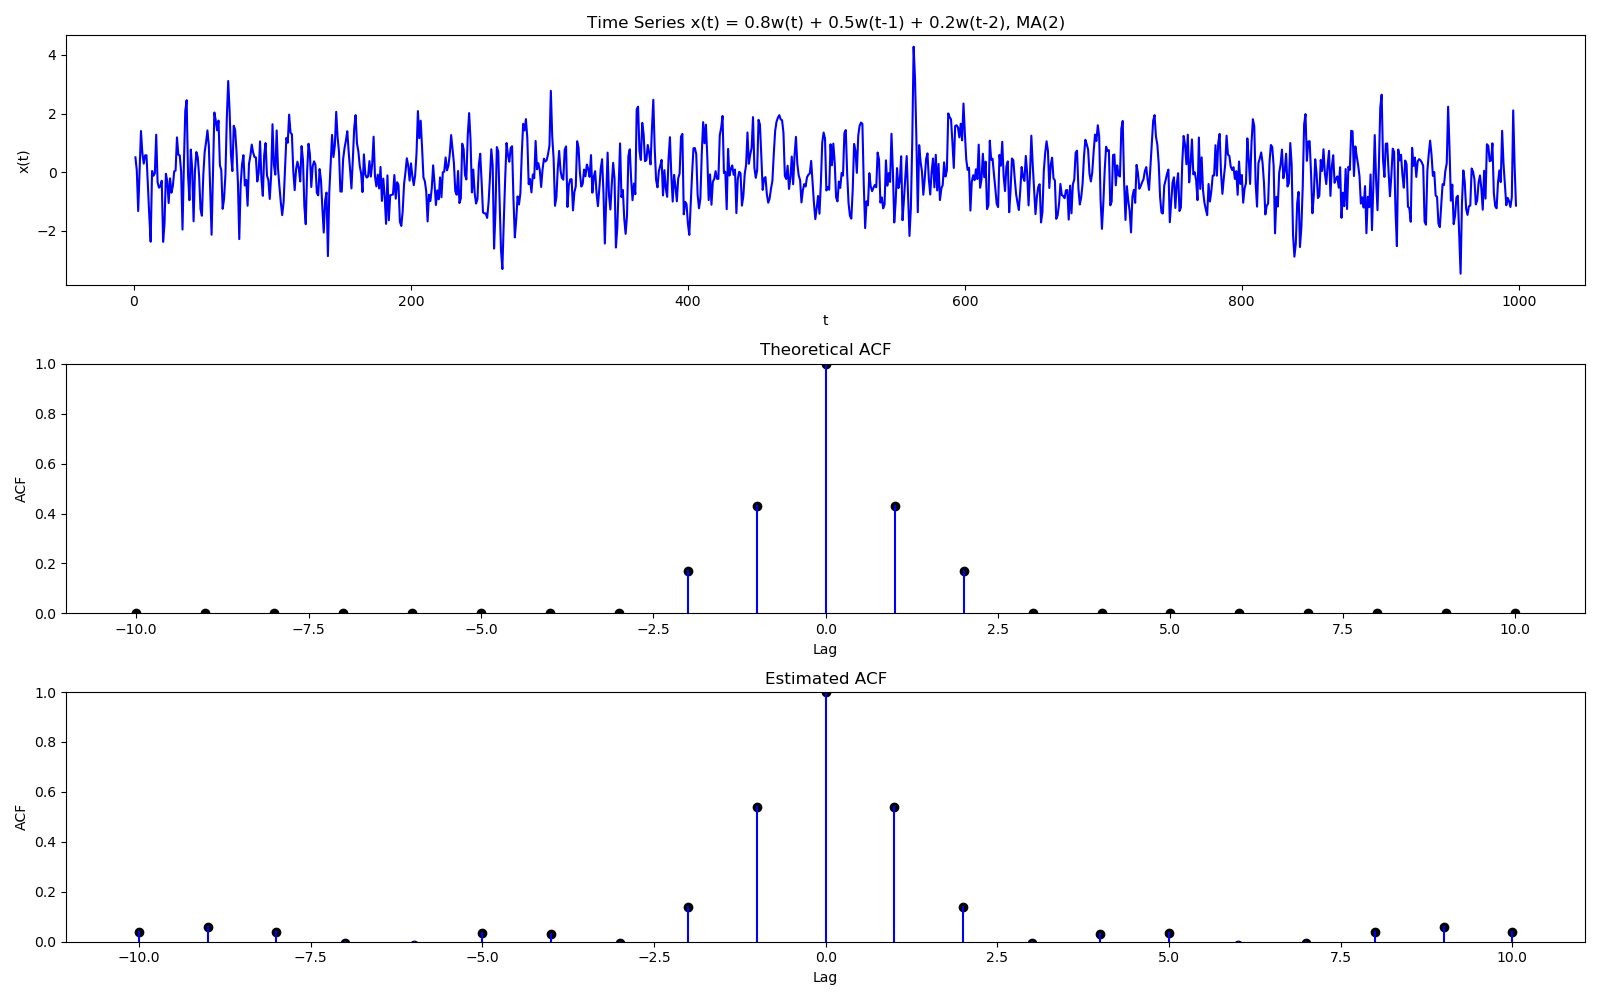 Top figure shows a time series, with the theoretical and estimated ACFs shown by middle and bottom figures respectively. Due to the symmetric nature, most packages only plot ACF for positive lags. Figures plot using <a href='/statistical-learning-notes/notes/time_series/codes/acf_simulation.html '>acf_simulation.py</a>